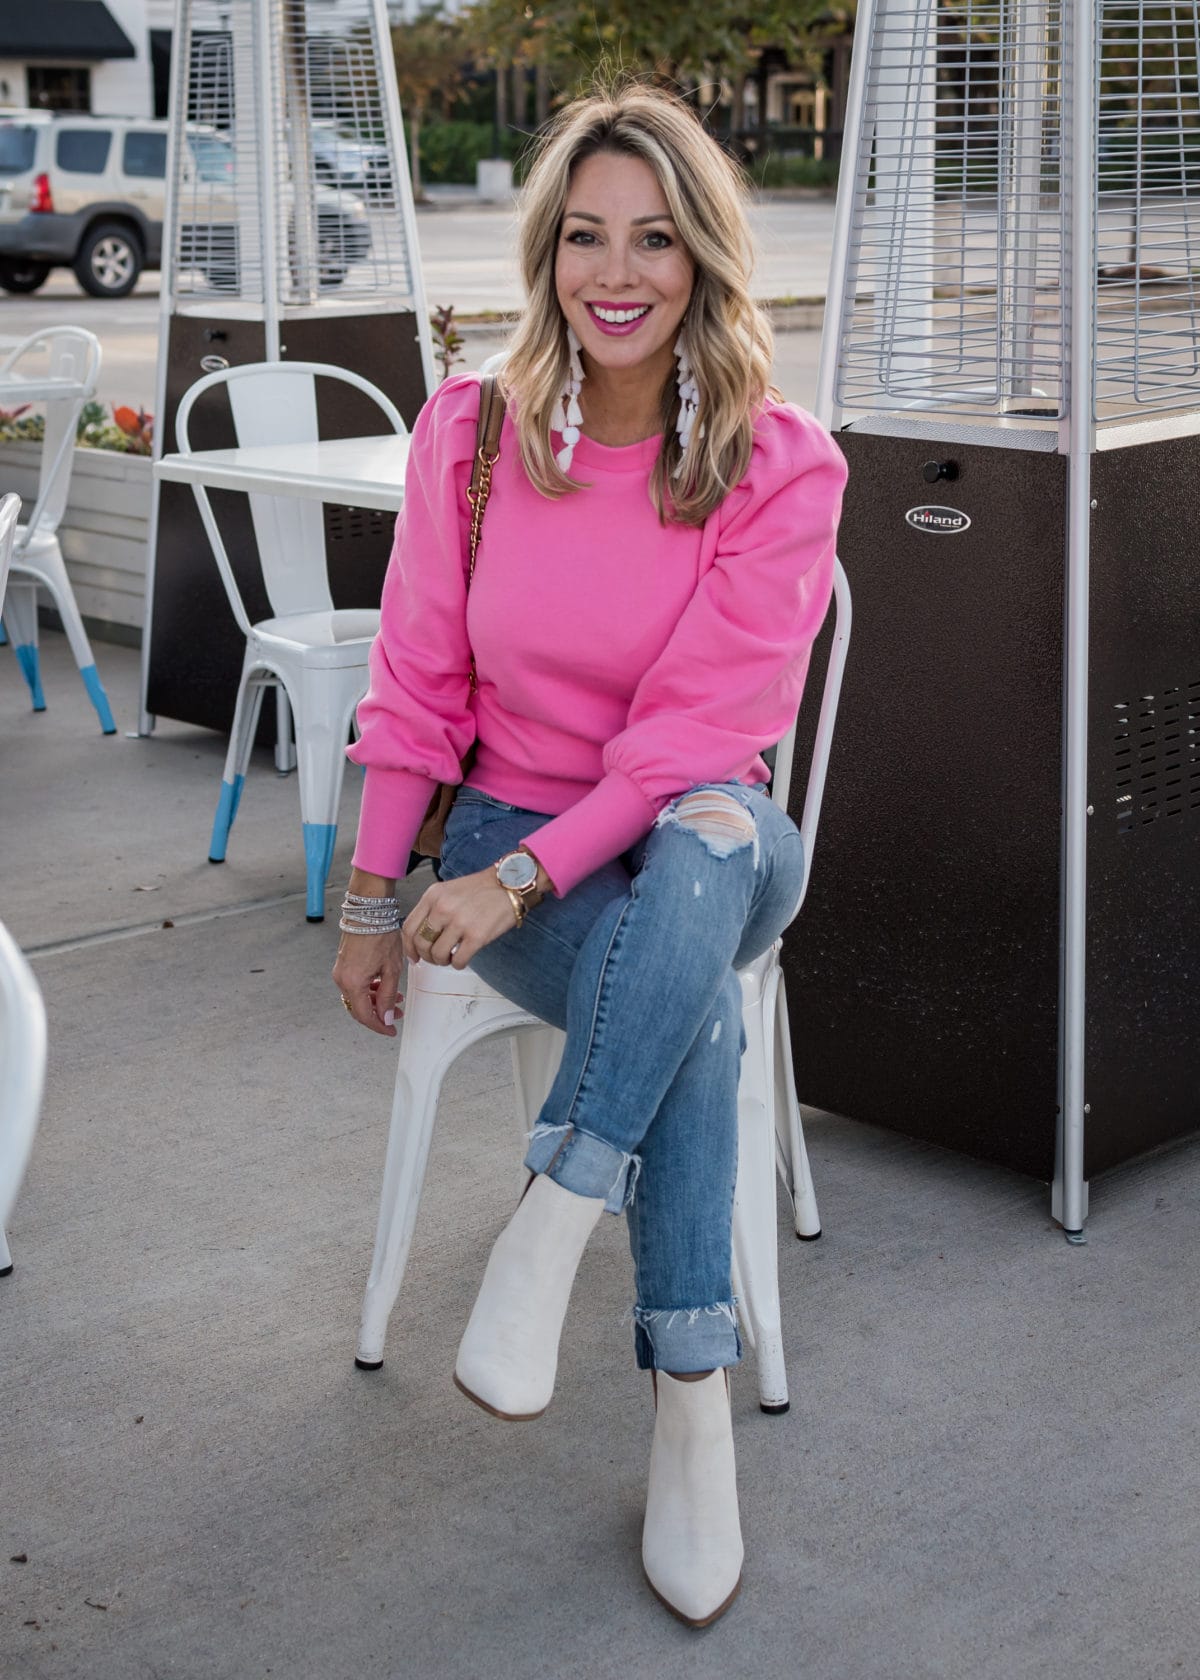 Valentine's Day Outfits, Pink Puff Sleeve Sweatshirt, Jeans, Booties, Statement Earrings